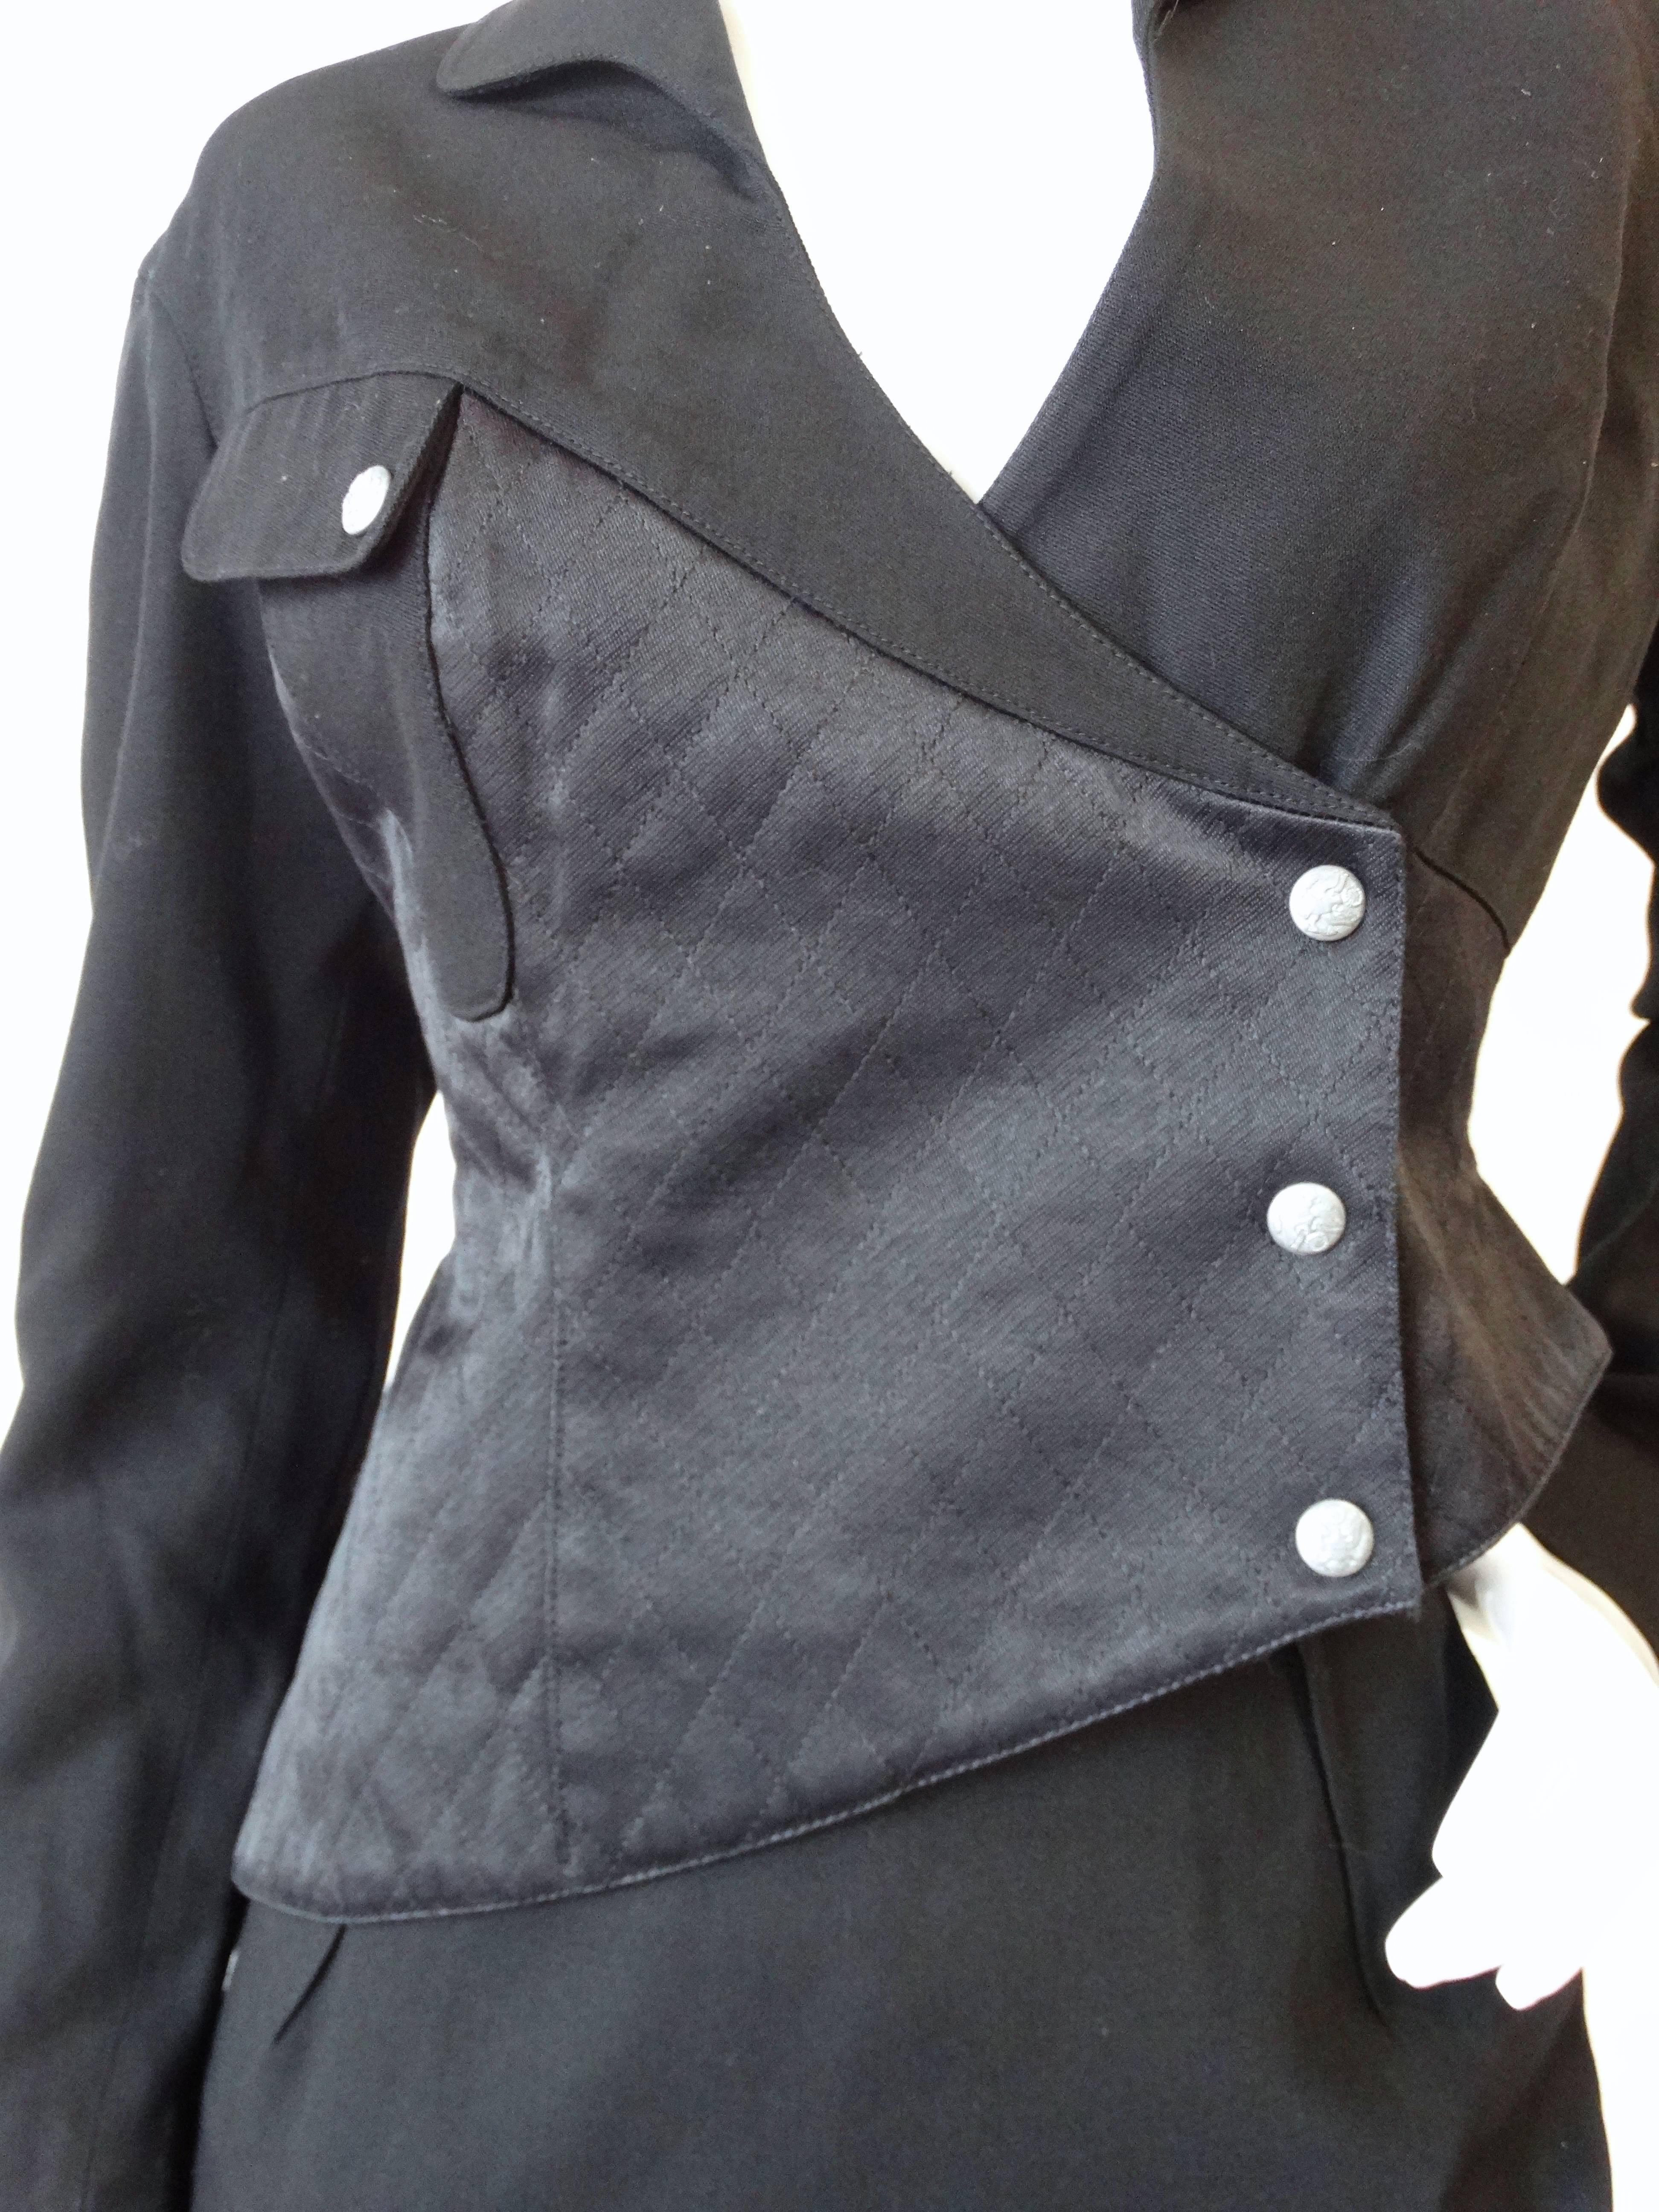 High fashion meets workplace apparel in our incredible 1980s Thierry Mugler suit set! The construction of this jacket is amazing, thick black fabric contrasted with quilted satin. Asymmetrical hemline adds some futuristic flair. Silver snap buttons